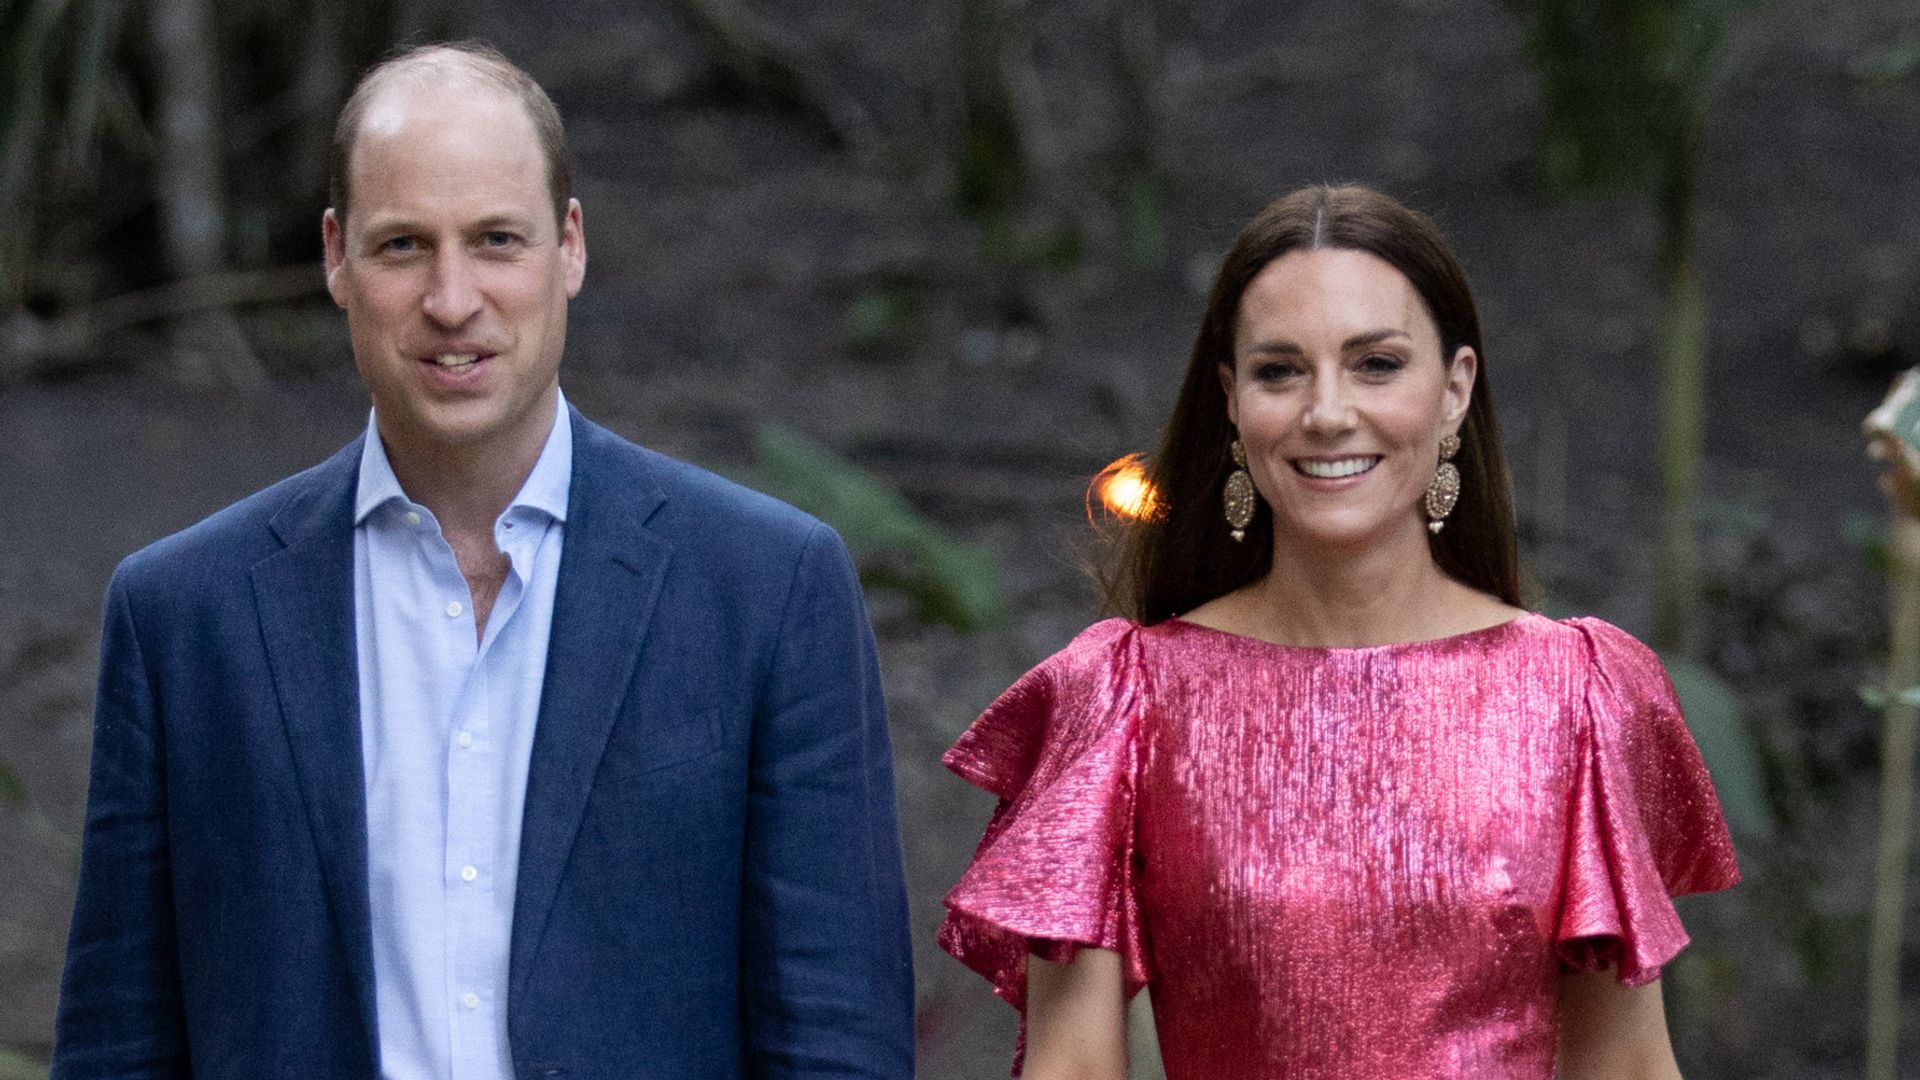 Will William and Kate be guests at the Jordan royal wedding?